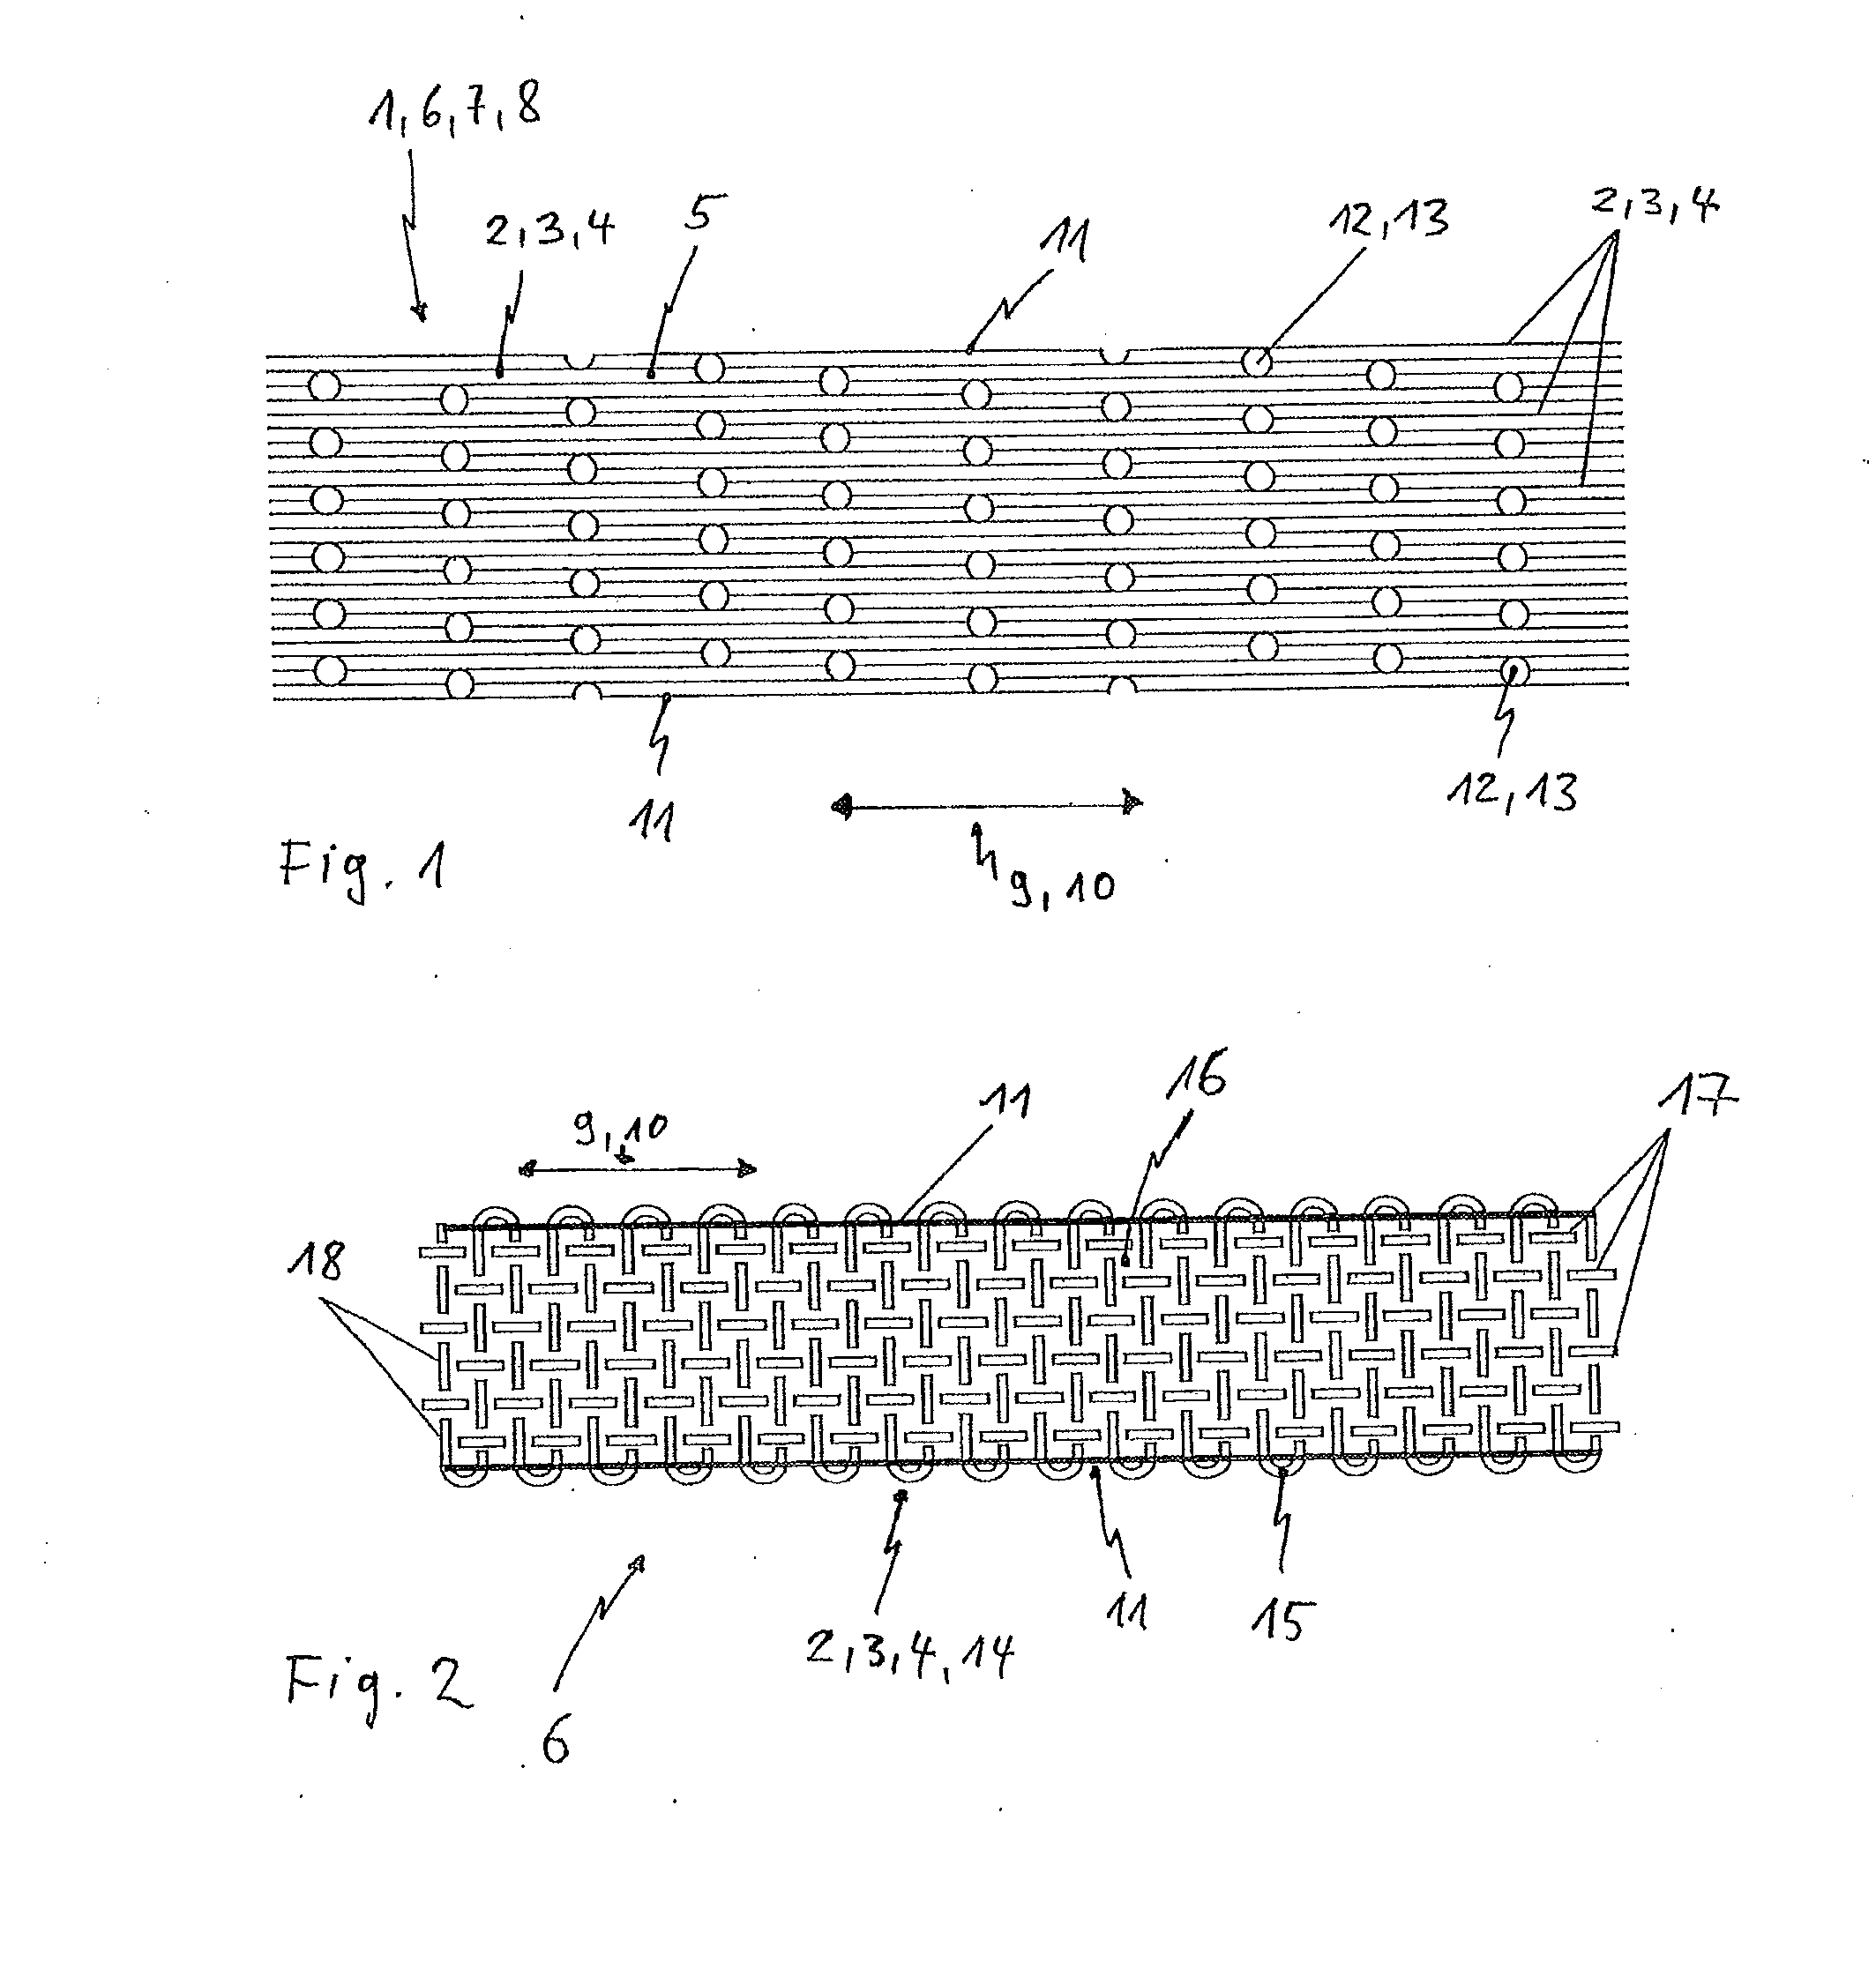 Electrically conductive material, emitter containing electrically conductive material, and method for its manufacture